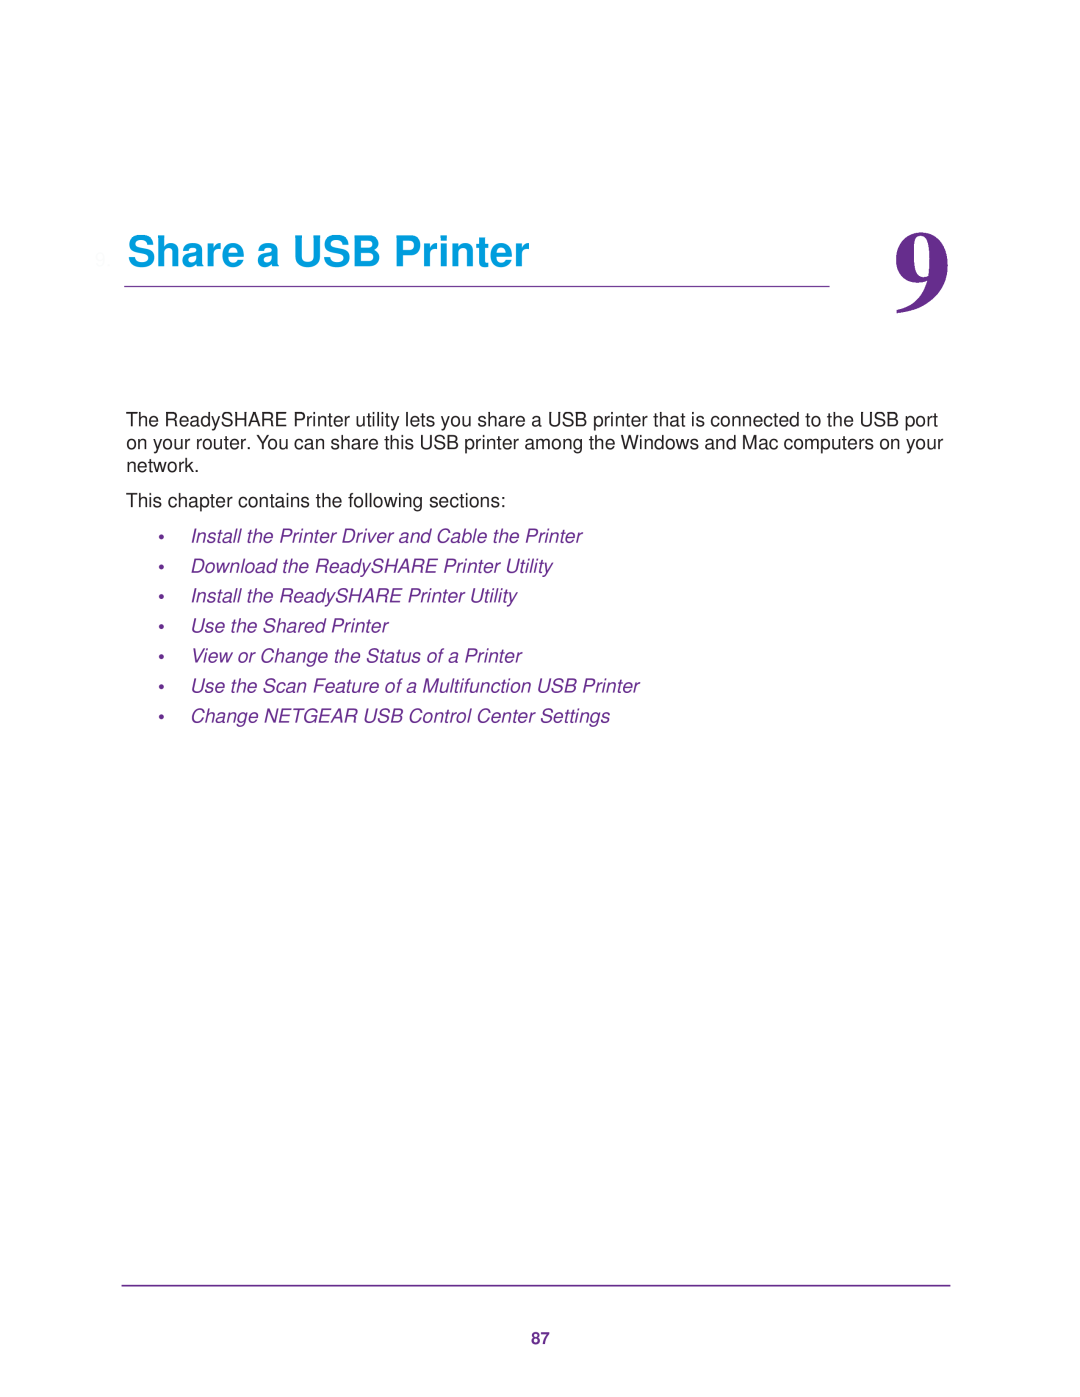 NETGEAR R7000 user manual Share a USB Printer, Install the Printer Driver and Cable the Printer 